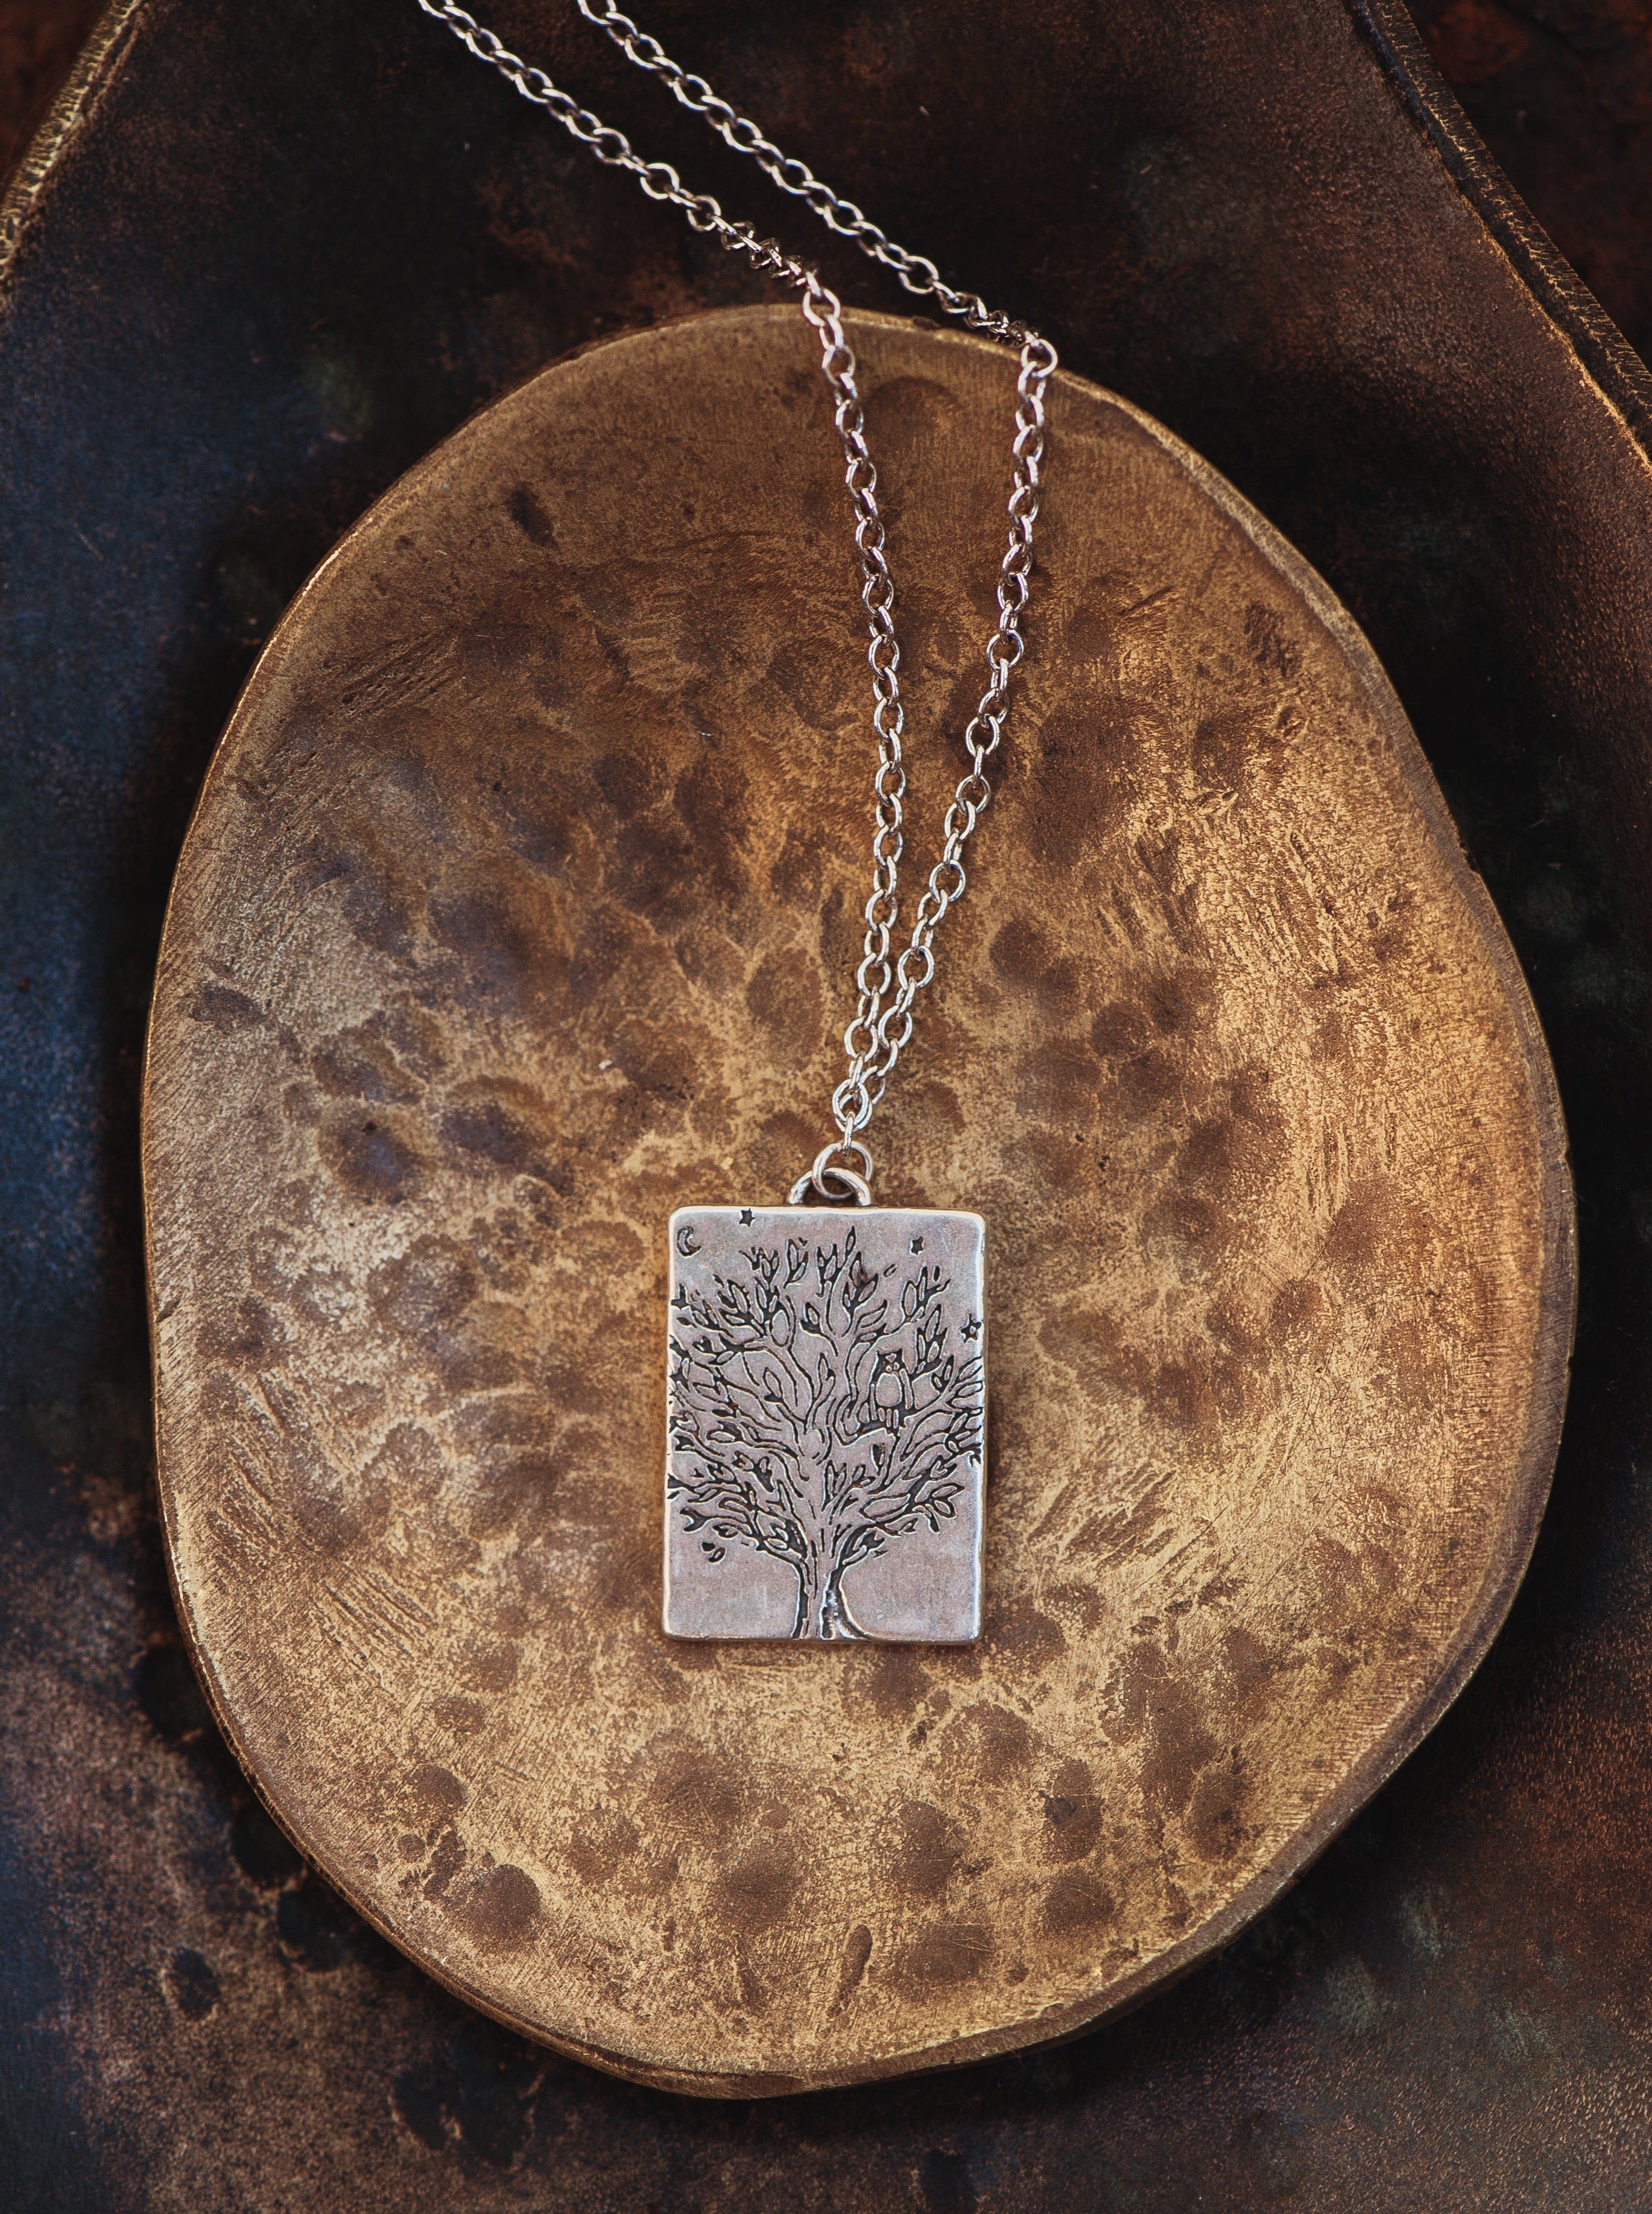 Nurture Every Moment Necklace